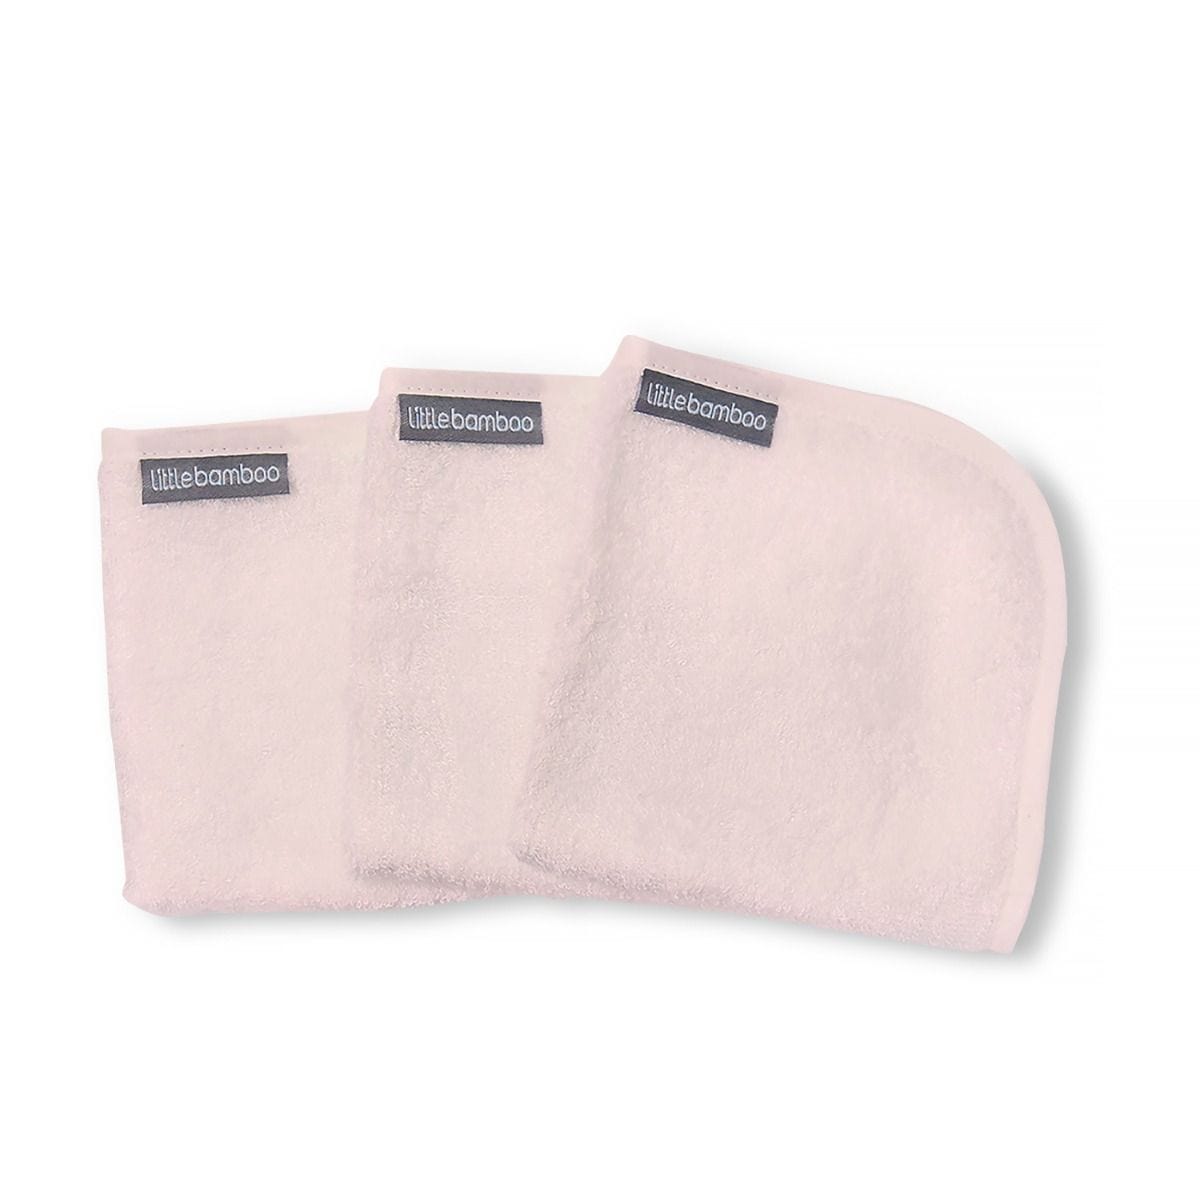 Little Bamboo Bath Little Bamboo Towelling Wash Cloth 3Pk - Dusty Pink